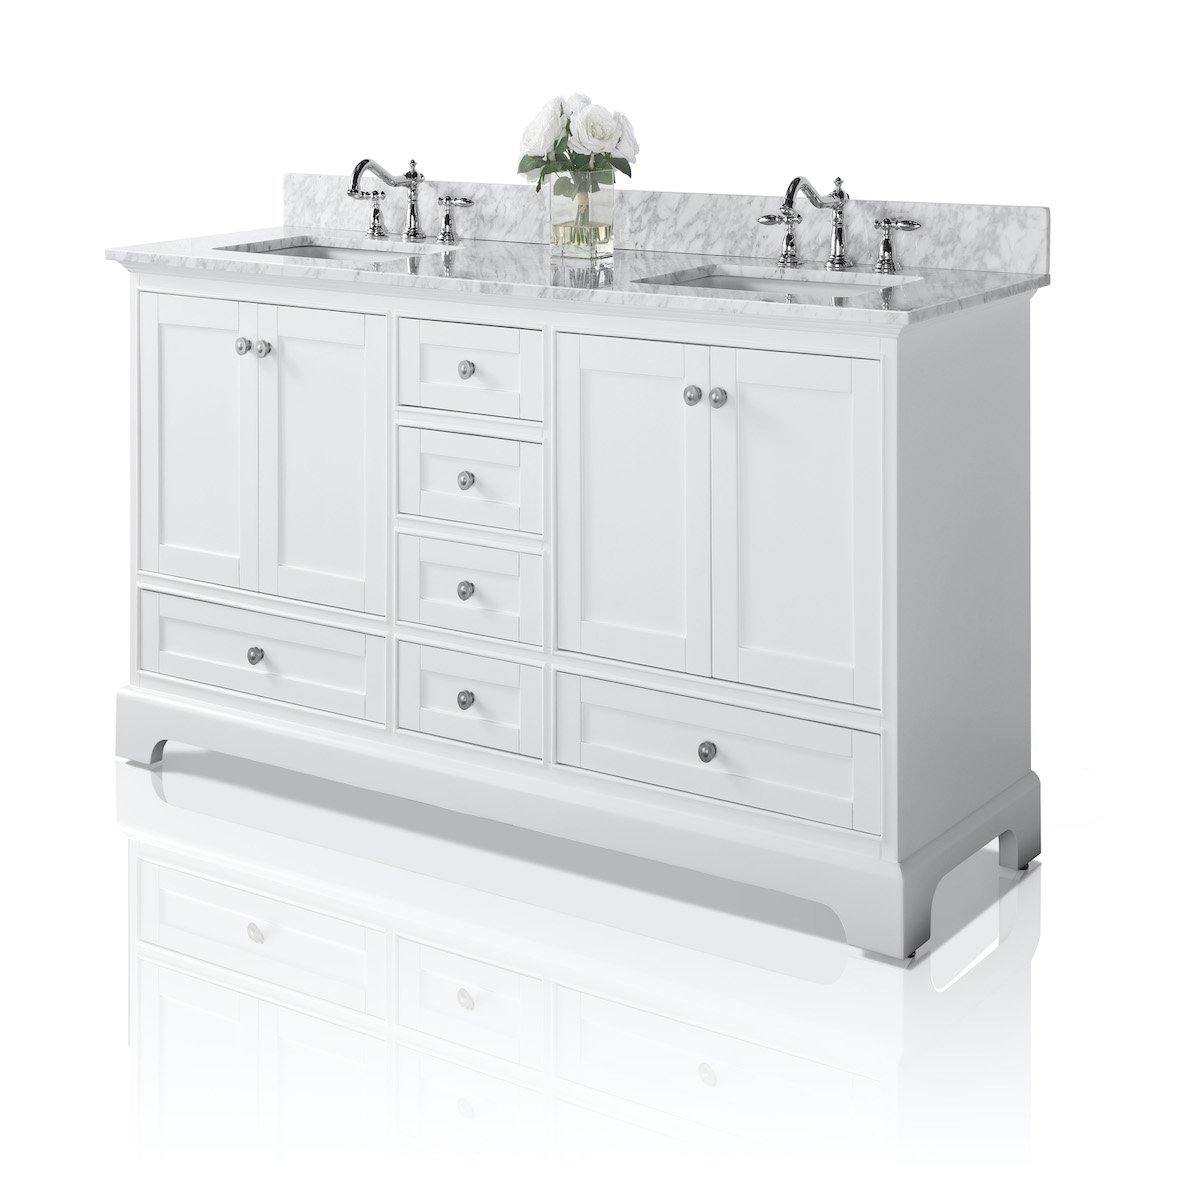 Ancerre Designs Audrey 72 Inch White Double Vanity Side